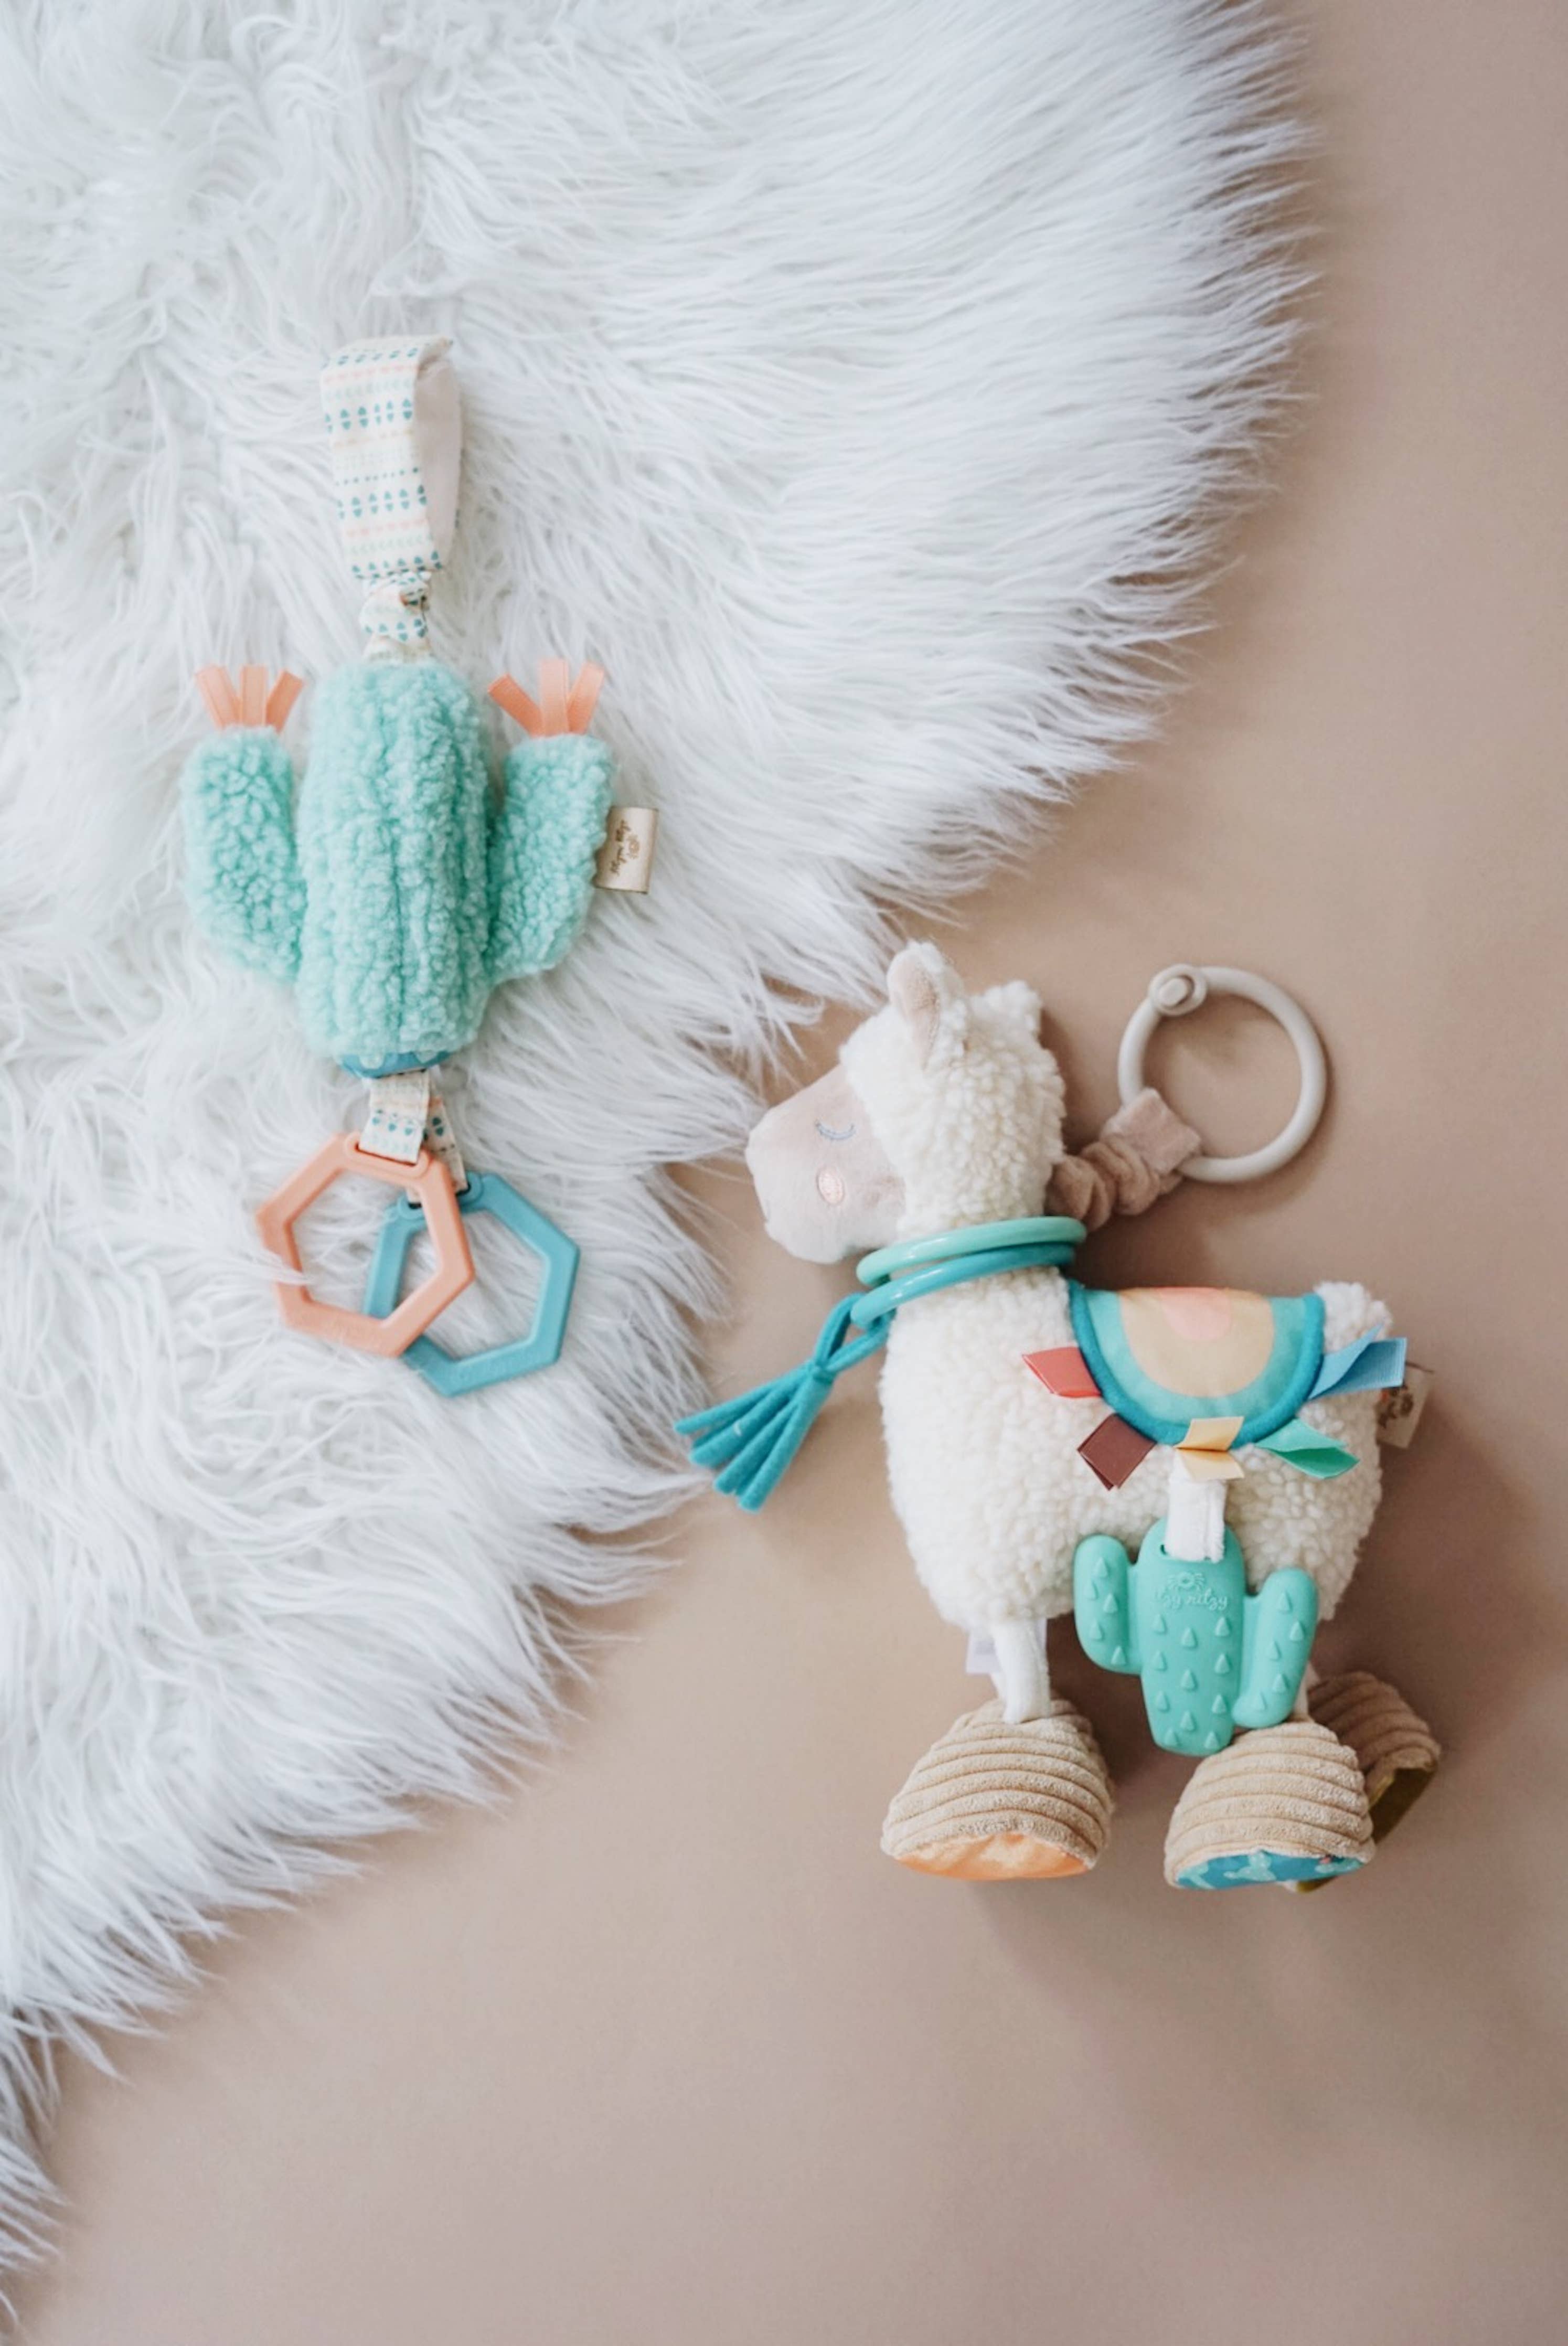 LLAMA Itzy Friends Link & Love™ Activity Plush with Teether Toy